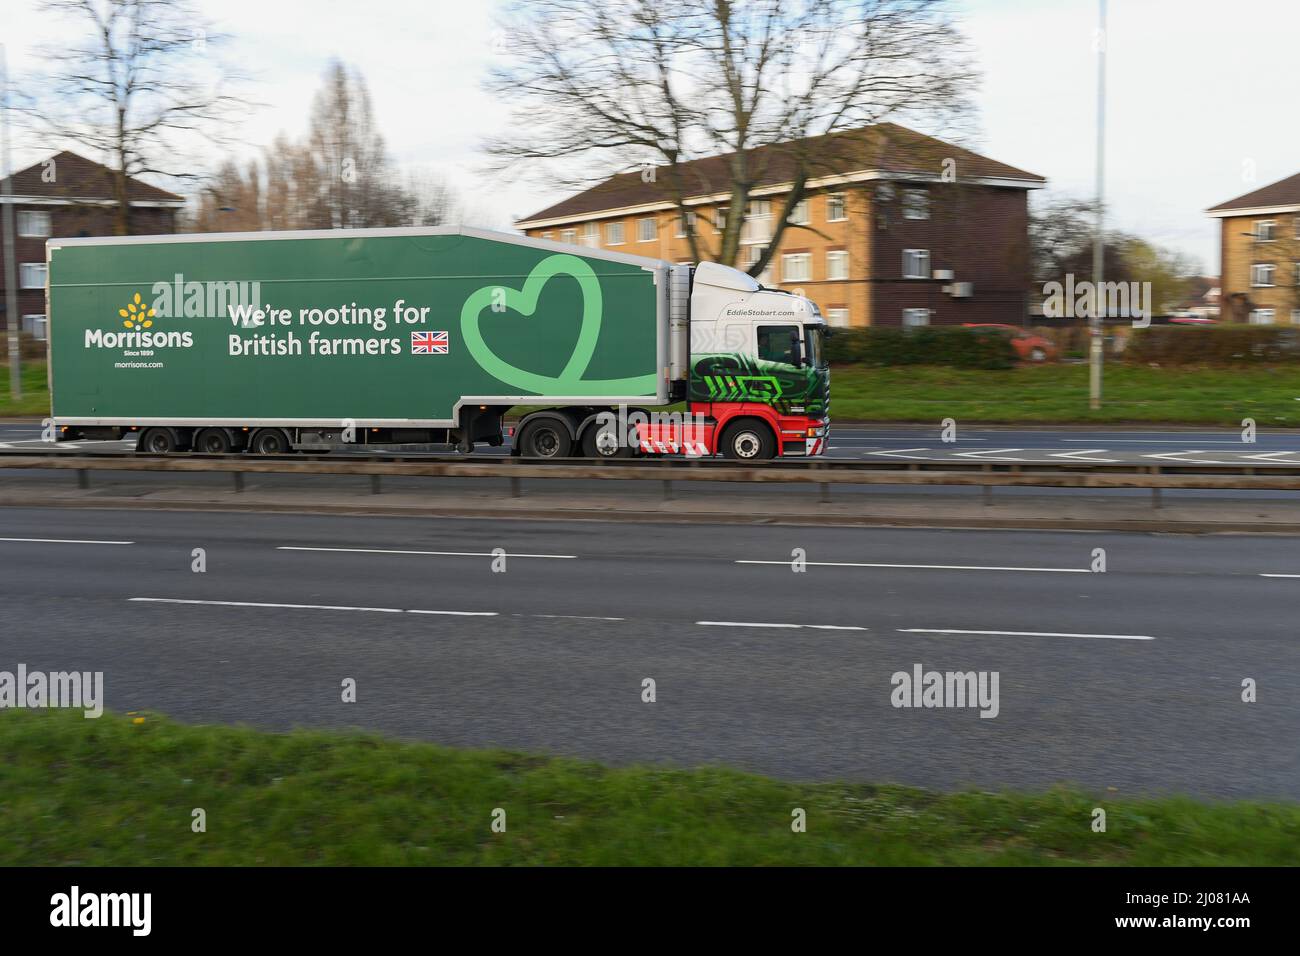 Morrisons supermarket articulated lorry driving along road with logo were rooting for British farmers on side of truck. Stock Photo